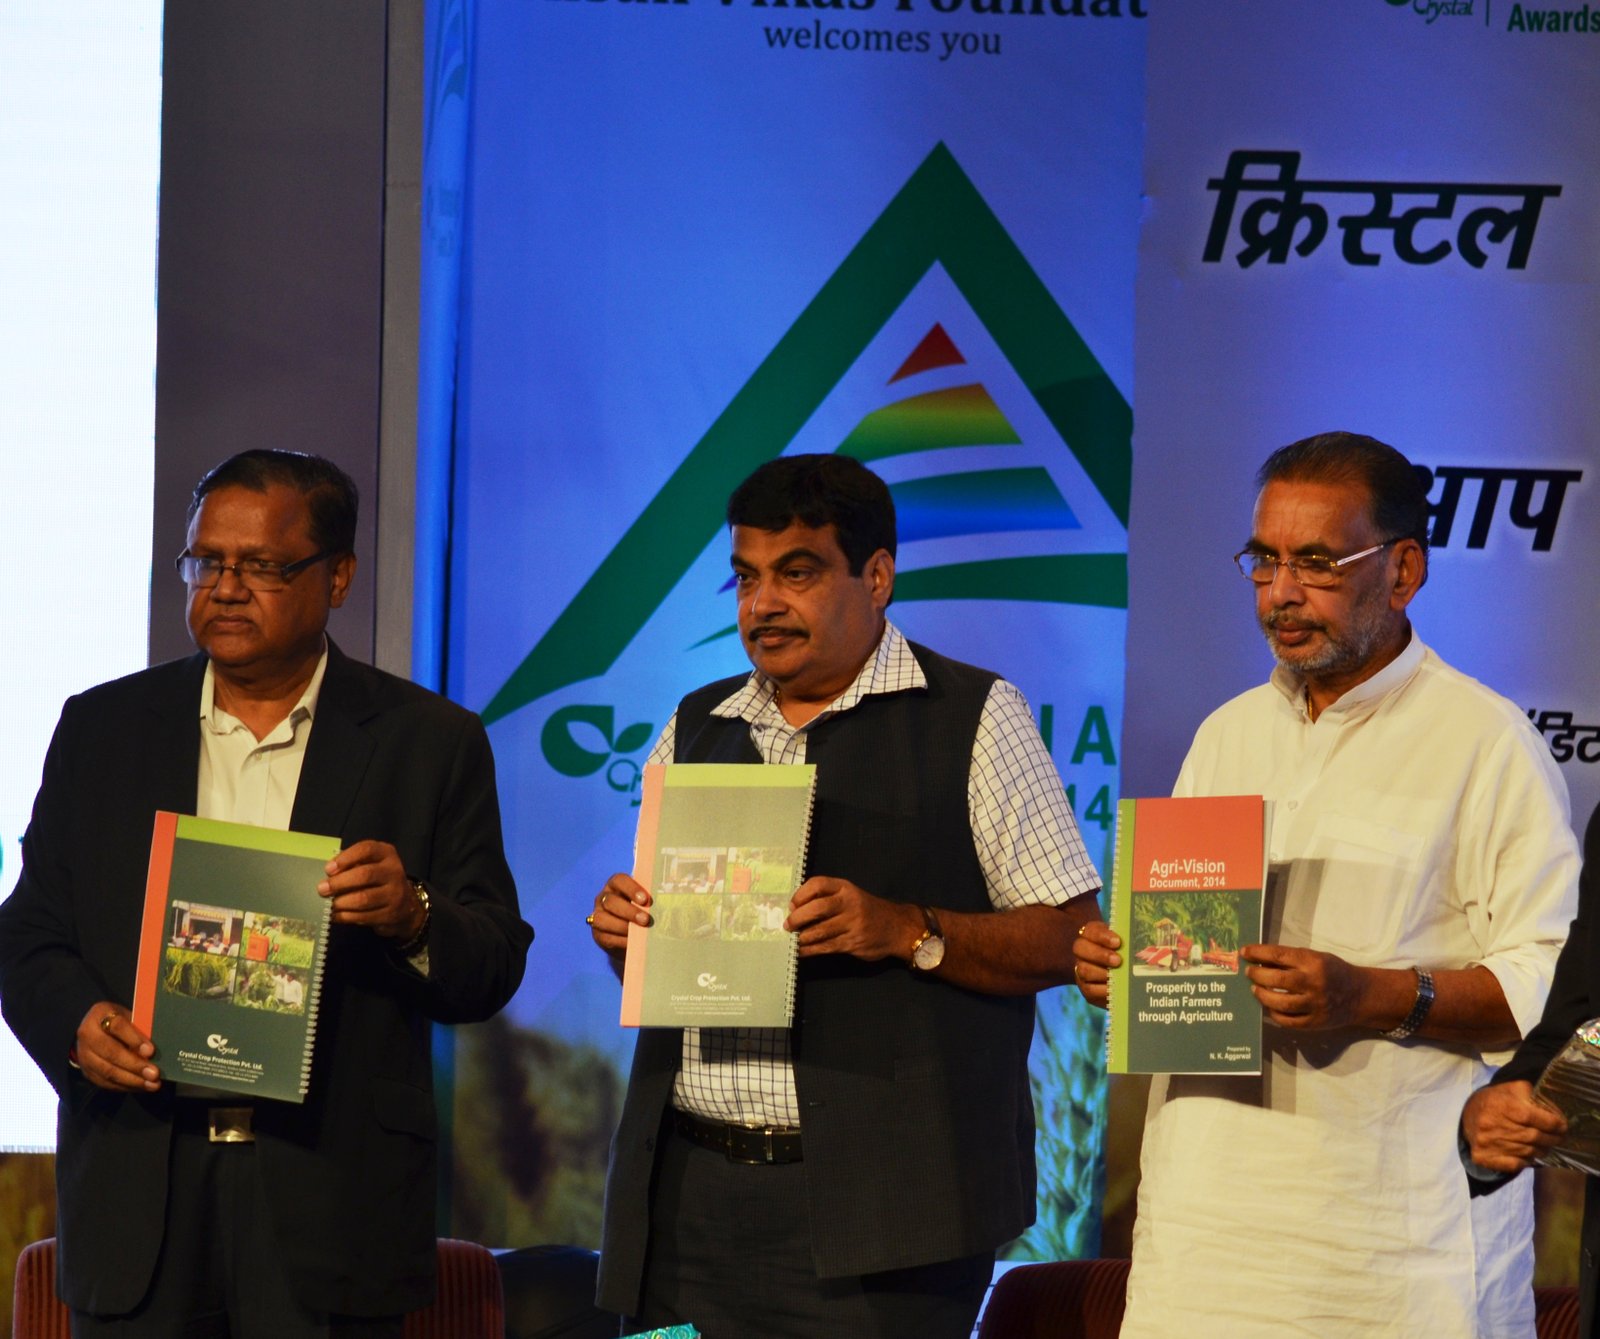 (R-L) The agriculture minister, Mr R M Singh along with Mr Nitin Gadkari, transport minister and Mr Nand Kishore Aggarwal,  chairman, Crystal Group